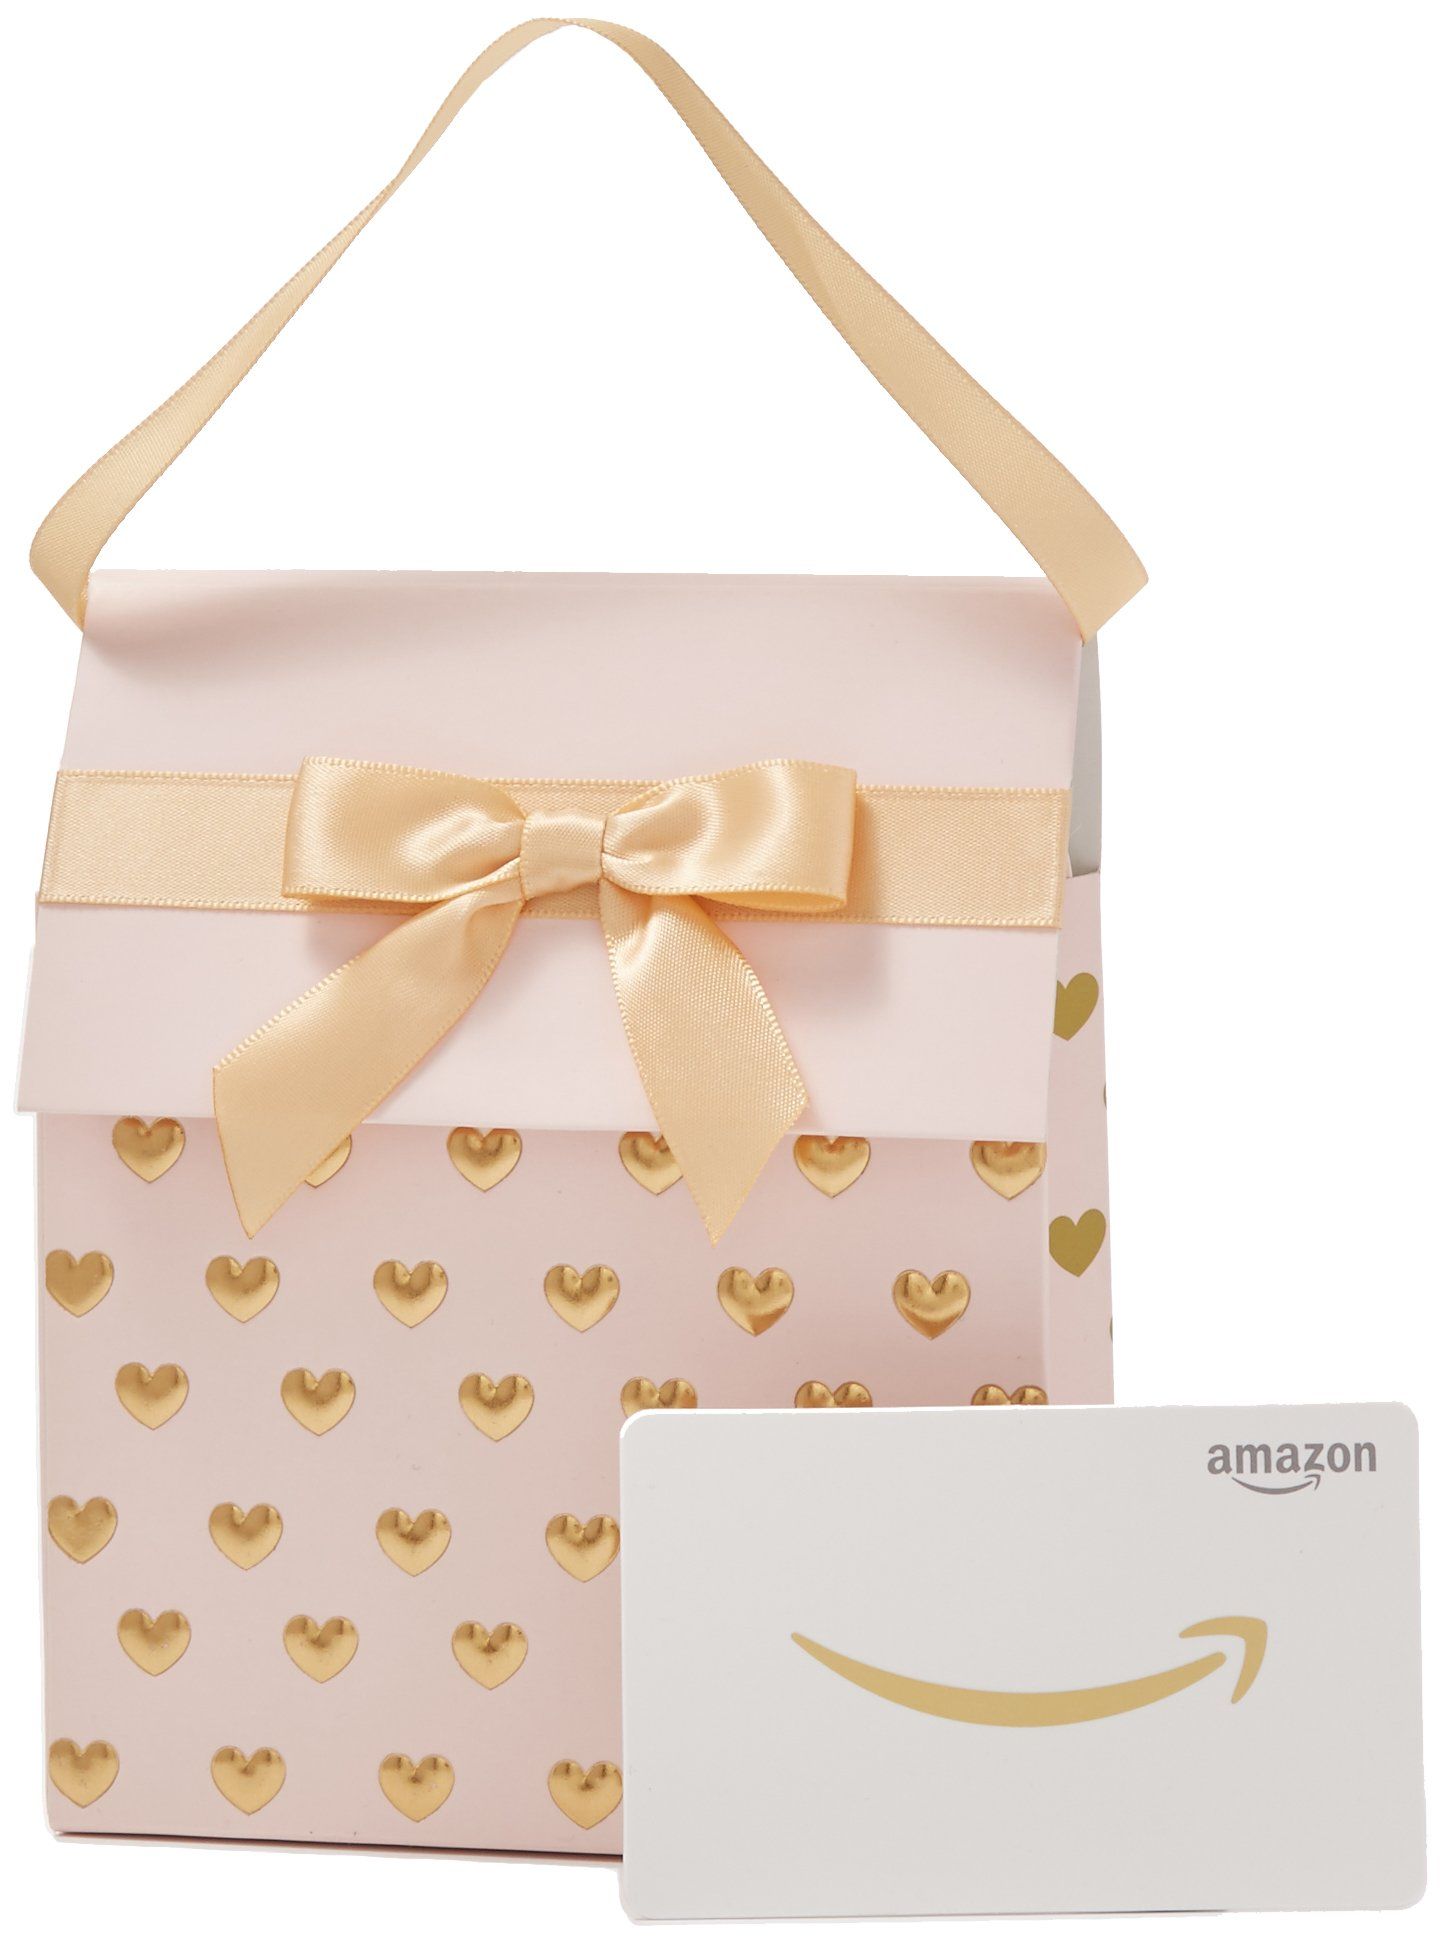 Amazon.com Gift Card in a Gift Bag | Amazon (US)